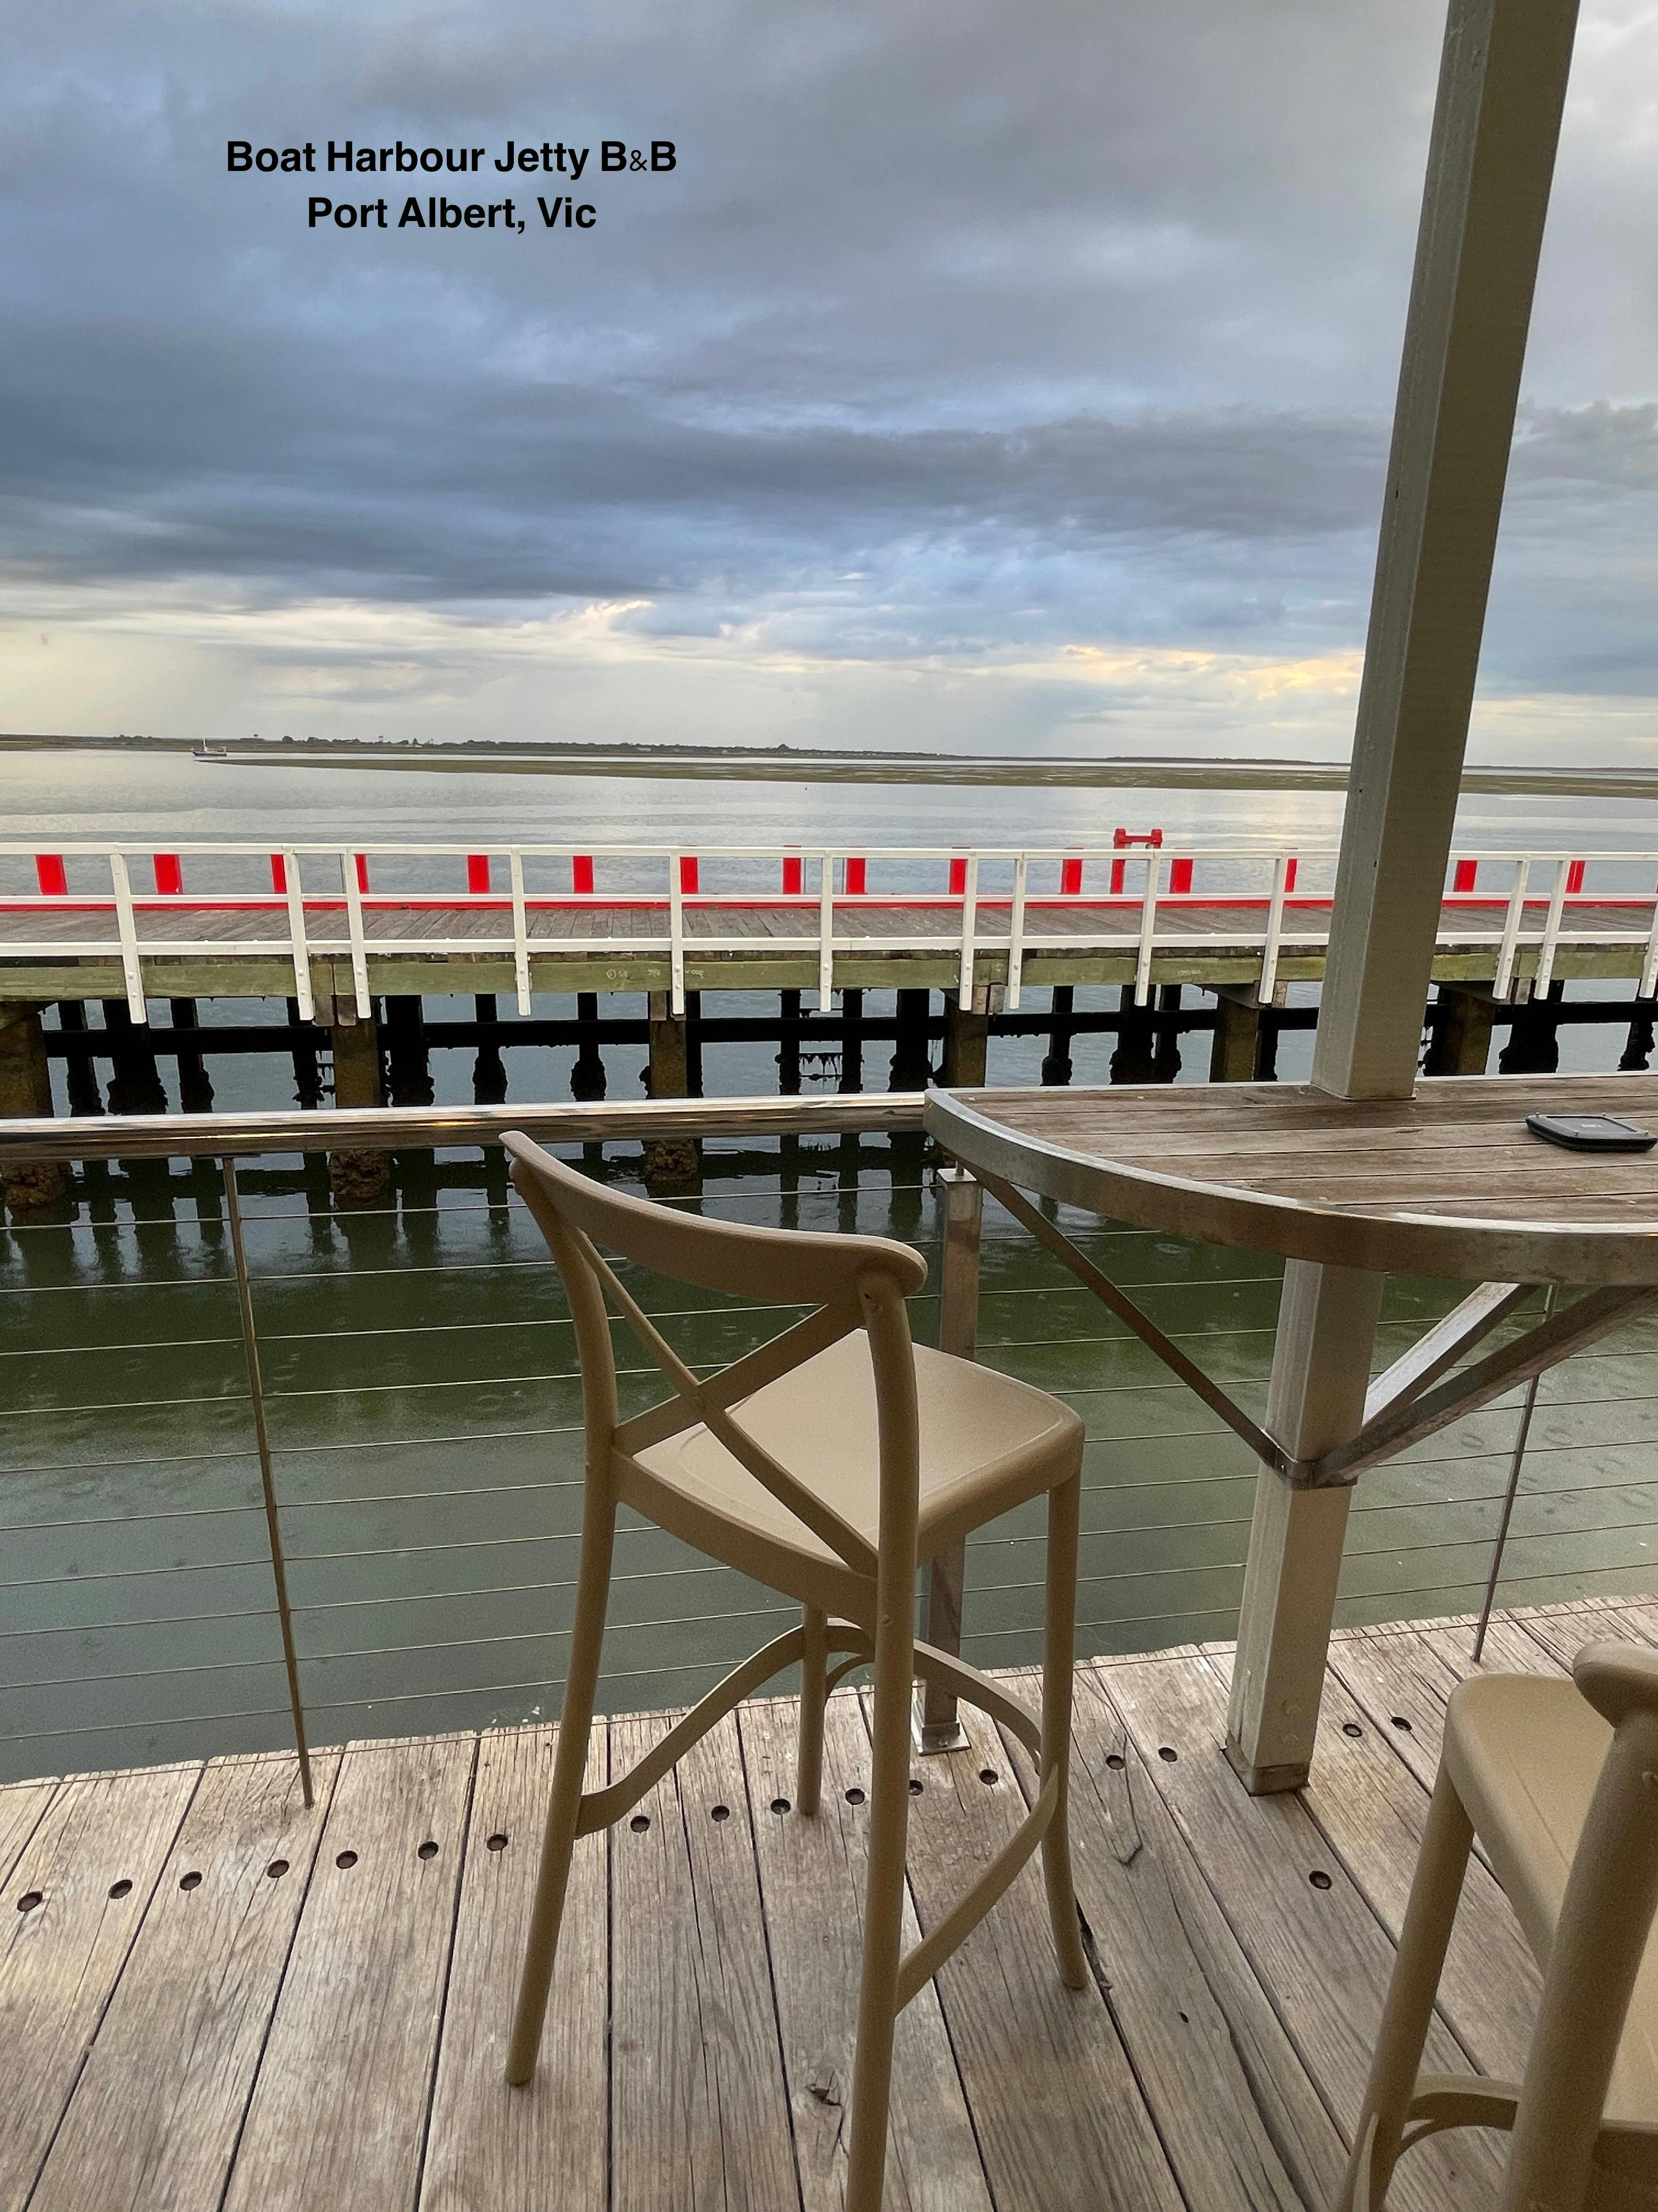 Port Albert Fish & Chip Co offers outside dining on their deck overlooking the harbour